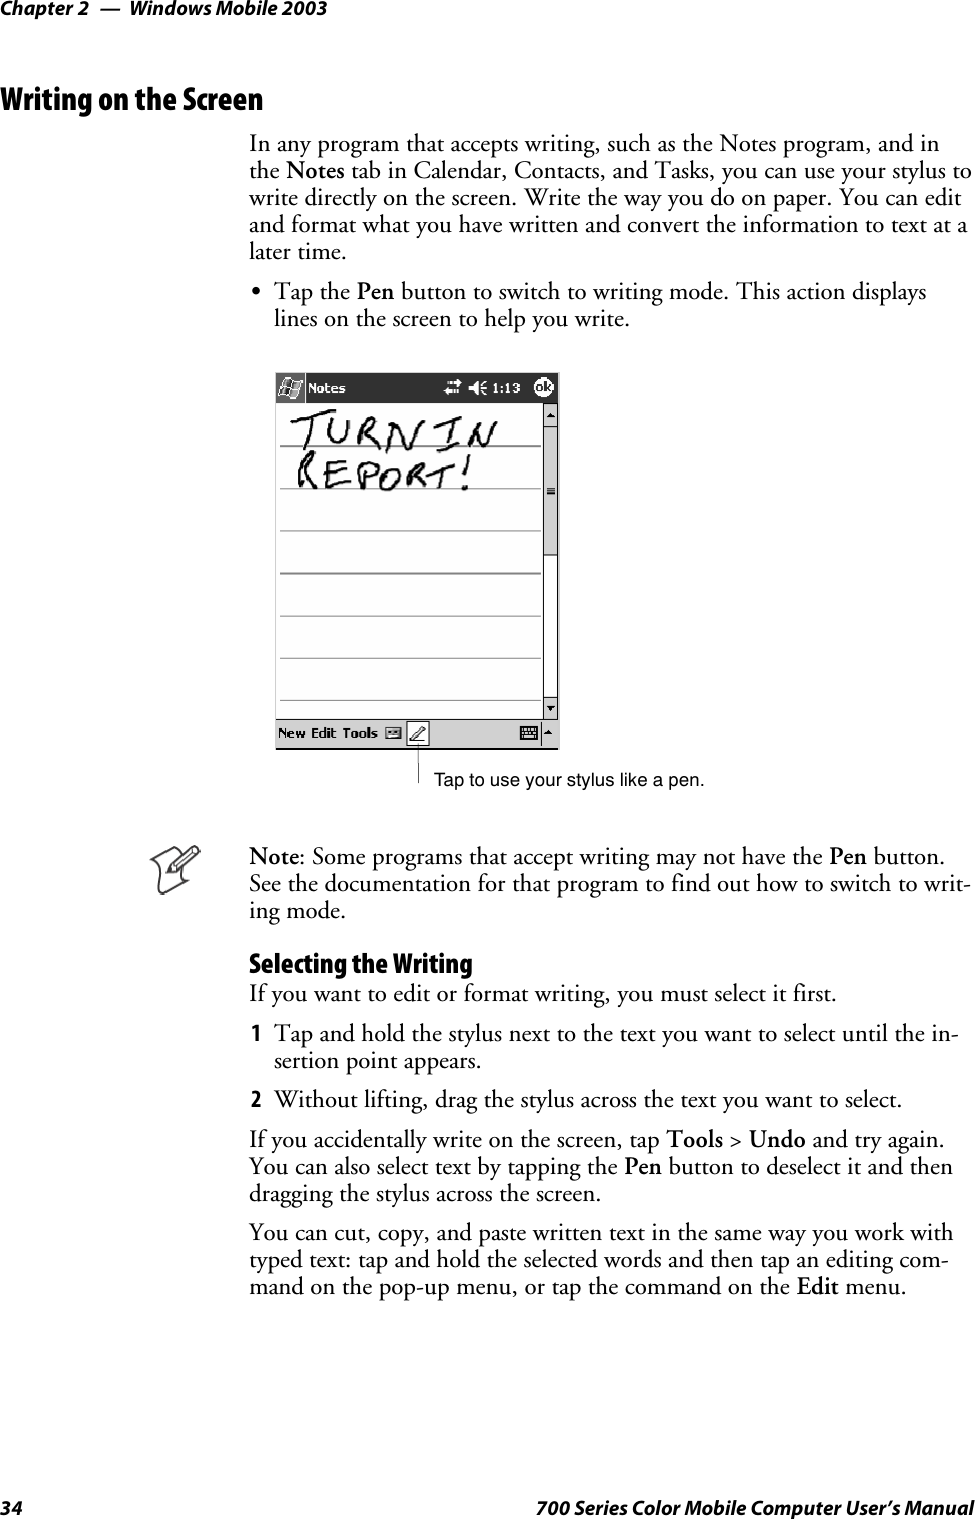 Windows Mobile 2003Chapter —234 700 Series Color Mobile Computer User’s ManualWriting on the ScreenIn any program that accepts writing, such as the Notes program, and inthe Notes tab in Calendar, Contacts, and Tasks, you can use your stylus towrite directly on the screen. Write the way you do on paper. You can editandformatwhatyouhavewrittenandconverttheinformationtotextatalater time.STap the Pen button to switch to writing mode. This action displayslines on the screen to help you write.Tap to use your stylus like a pen.Note: Some programs that accept writing may not have the Pen button.See the documentation for that program to find out how to switch to writ-ing mode.Selecting the WritingIf you want to edit or format writing, you must select it first.1Tap and hold the stylus next to the text you want to select until the in-sertion point appears.2Without lifting, drag the stylus across the text you want to select.If you accidentally write on the screen, tap Tools &gt;Undo and try again.You can also select text by tapping the Pen button to deselect it and thendragging the stylus across the screen.You can cut, copy, and paste written text in the same way you work withtyped text: tap and hold the selected words and then tap an editing com-mand on the pop-up menu, or tap the command on the Edit menu.